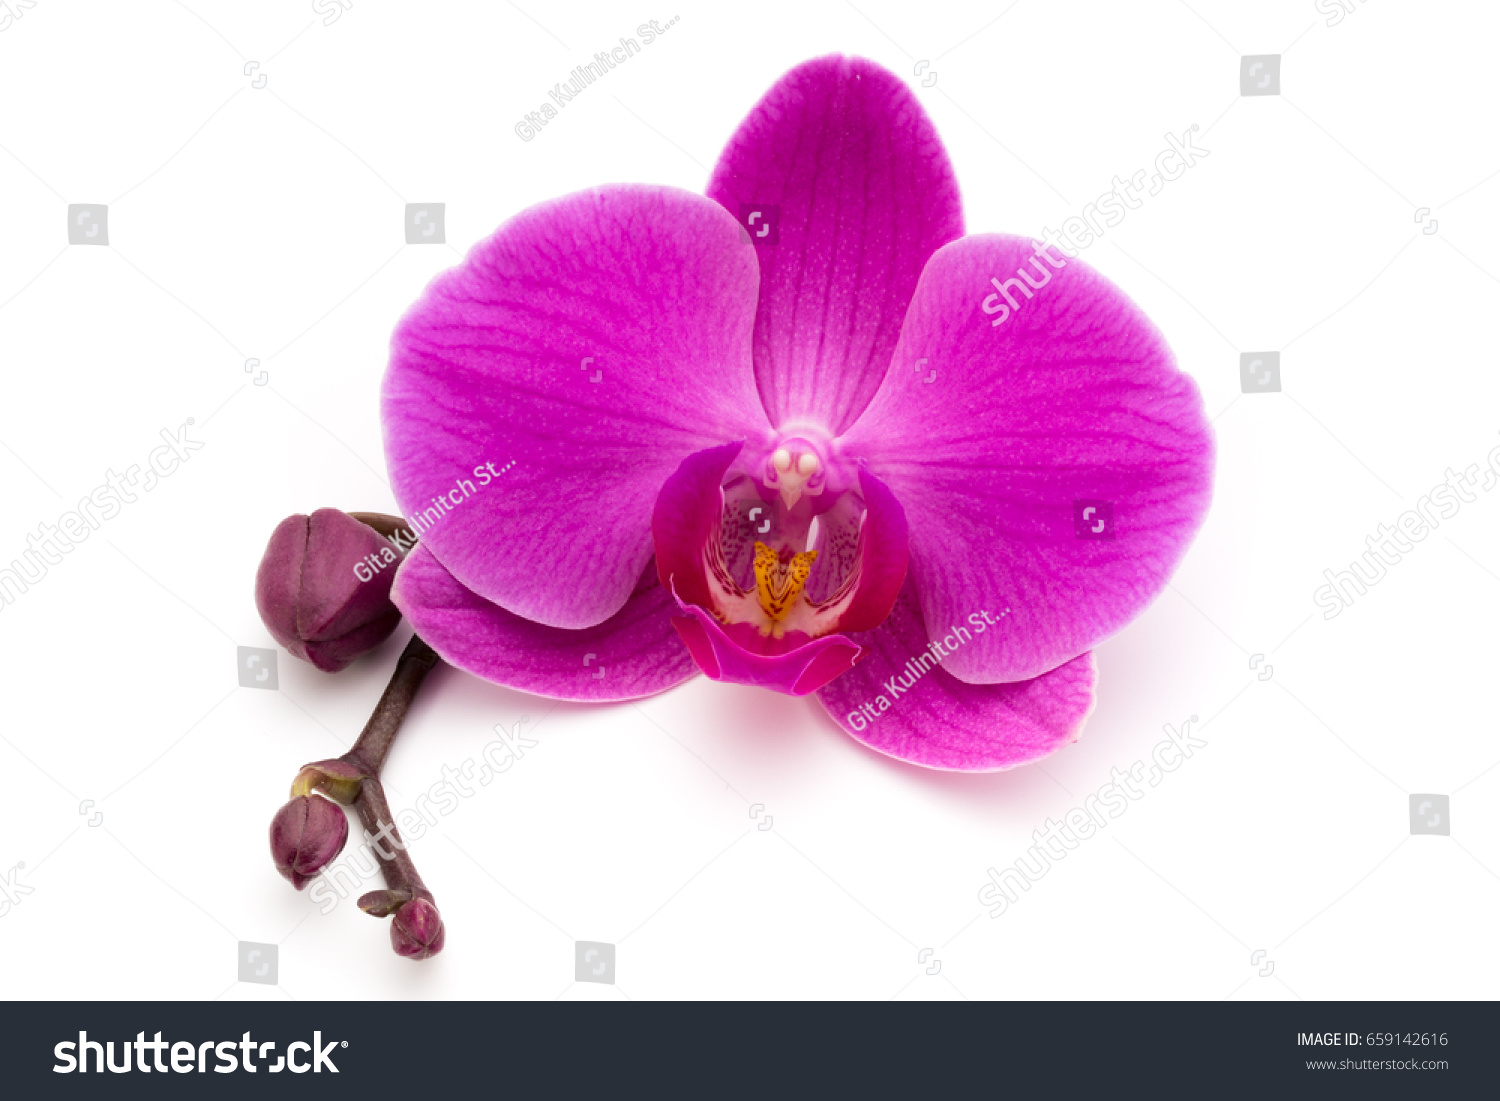 Pink orchids on the white background. #659142616